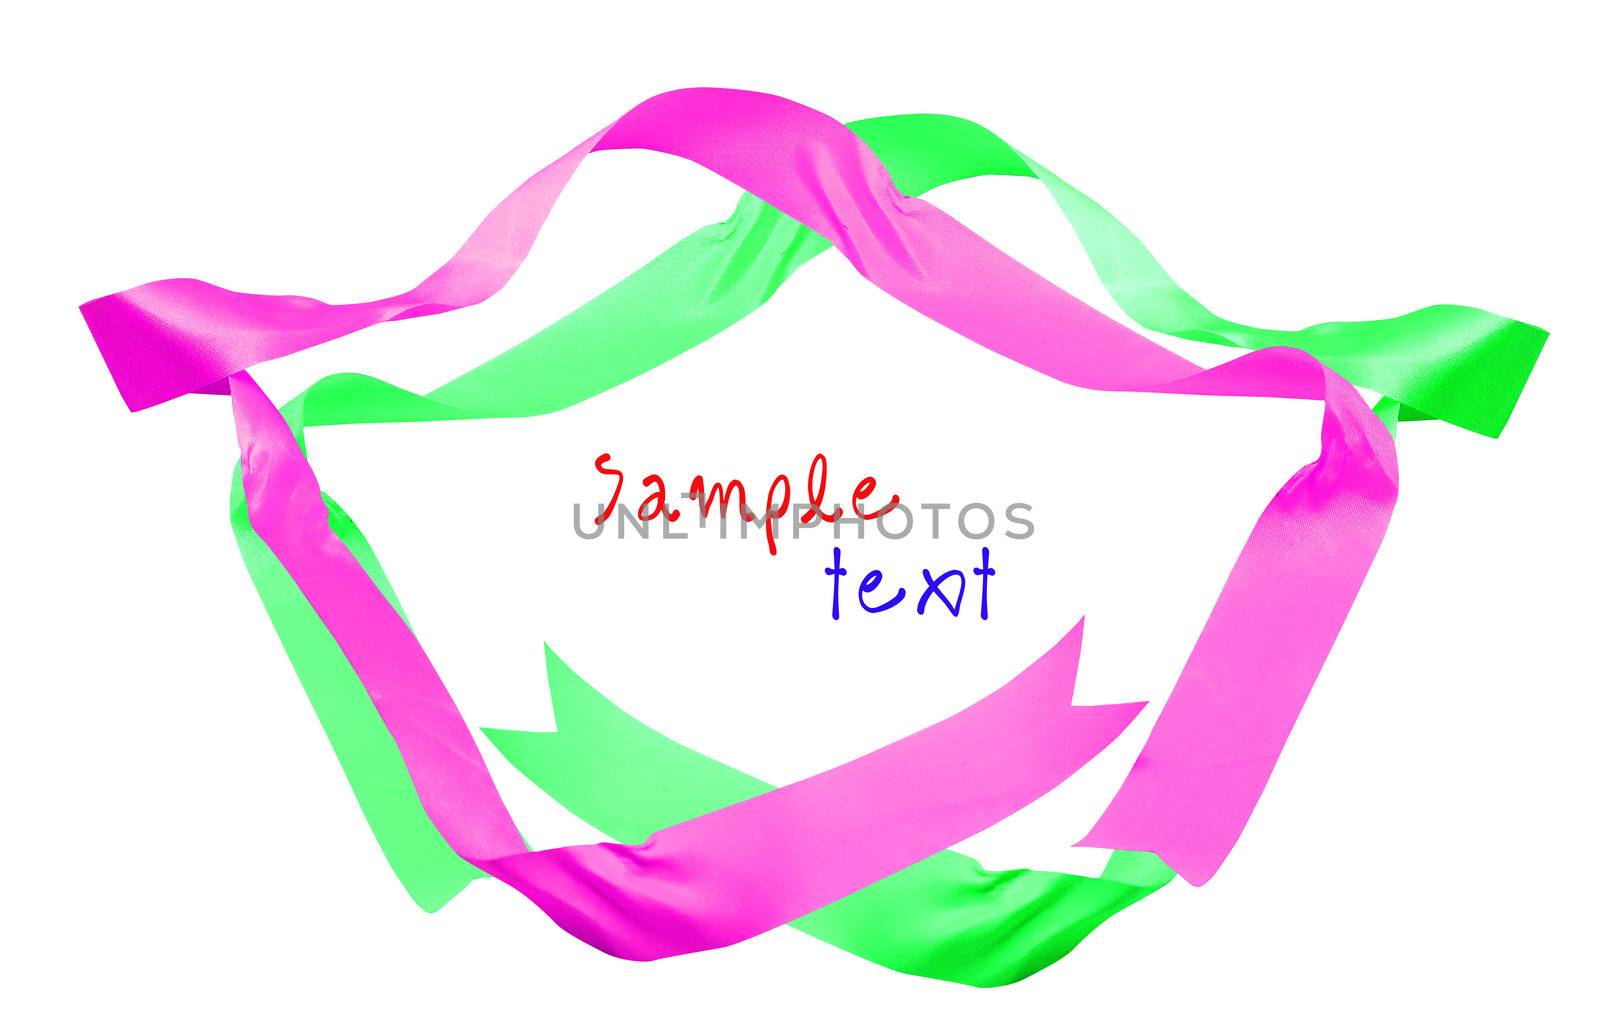 ribbons with bow on a white background